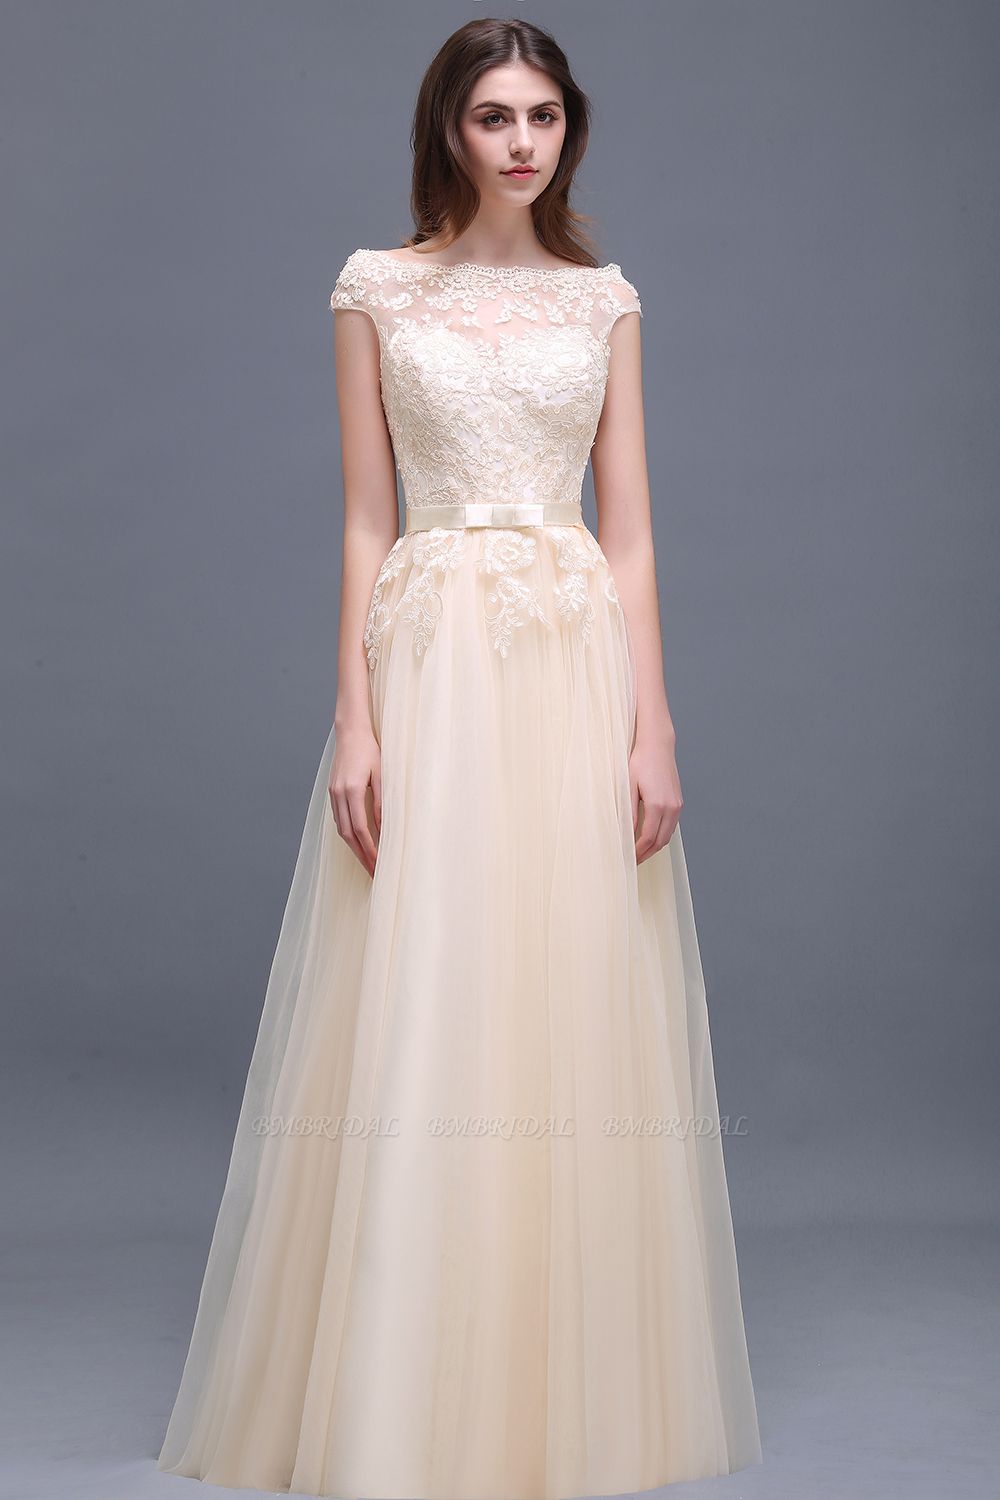 BMbridal Affordable Off-the-Shoulder Champagne Bridesmaid Dresses with Appliques